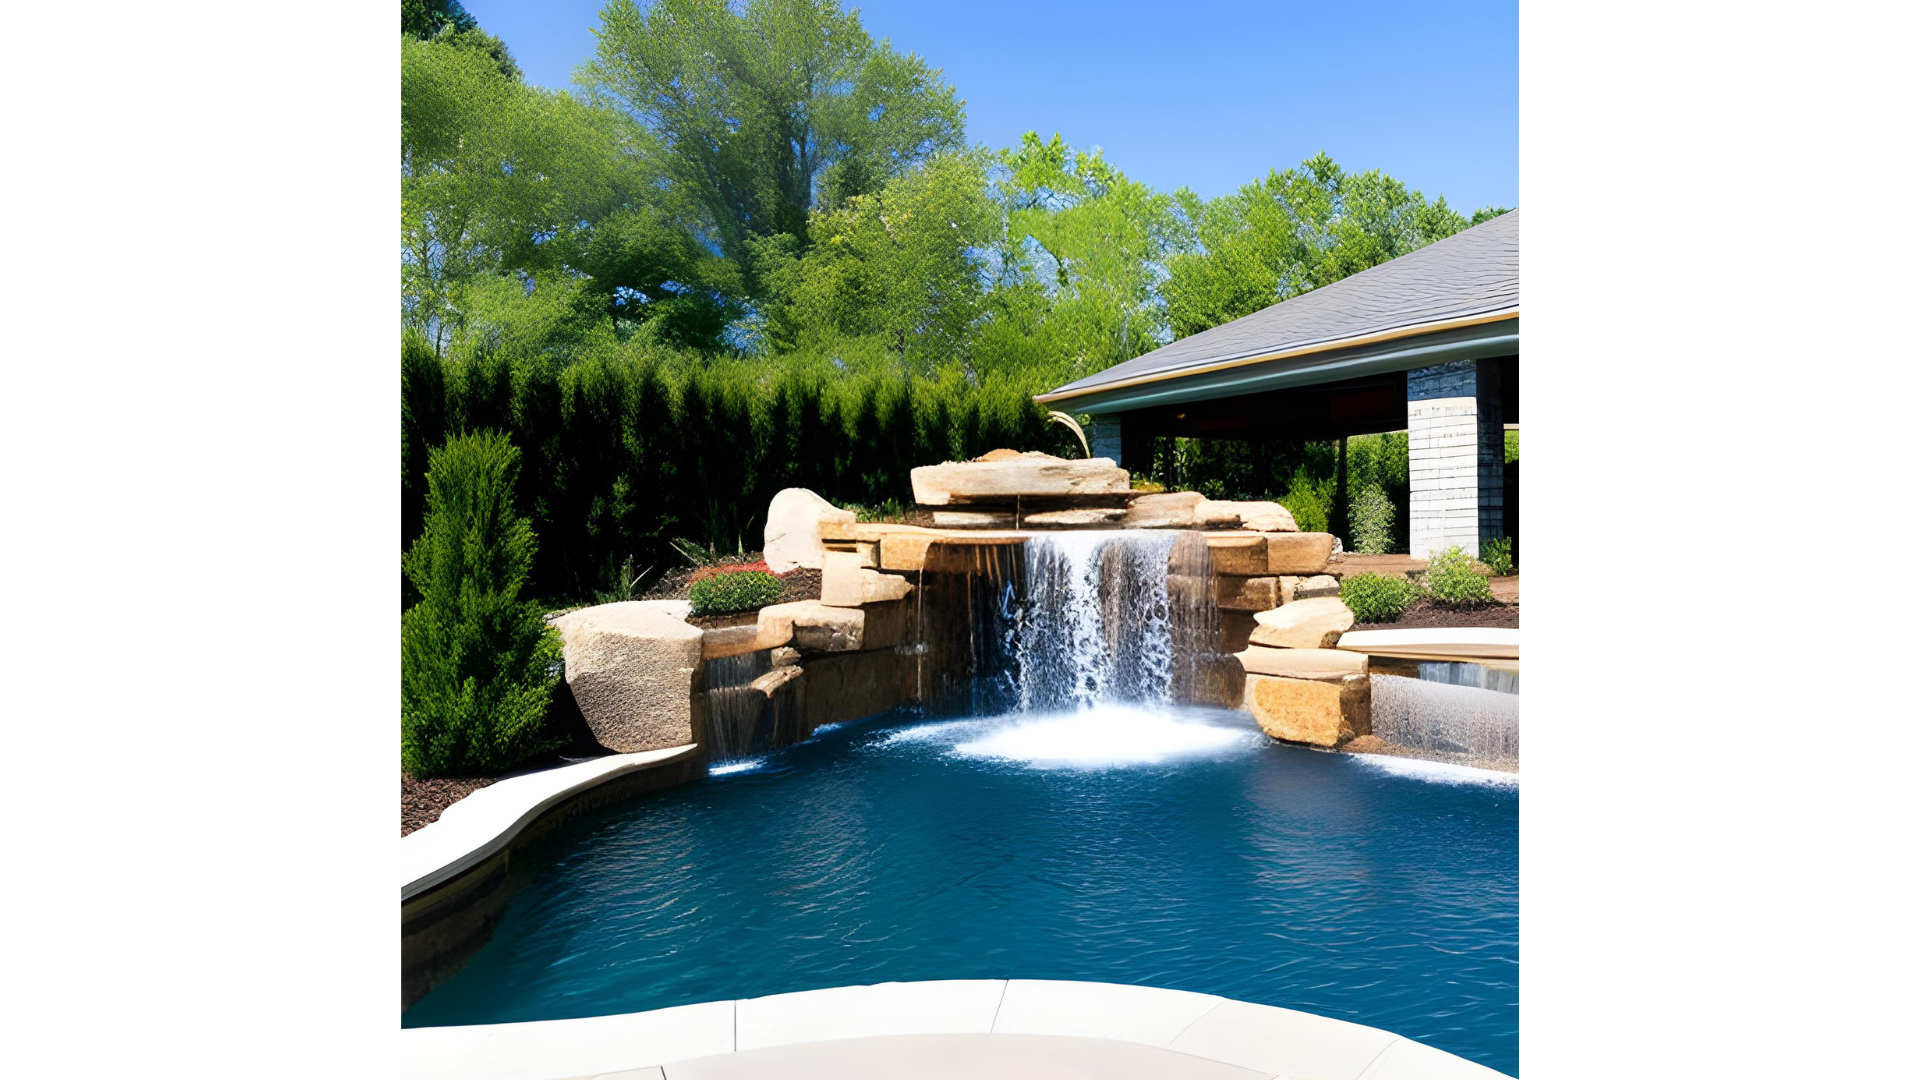 Top 5 Water Feature/Pond Companies in Minneapolis